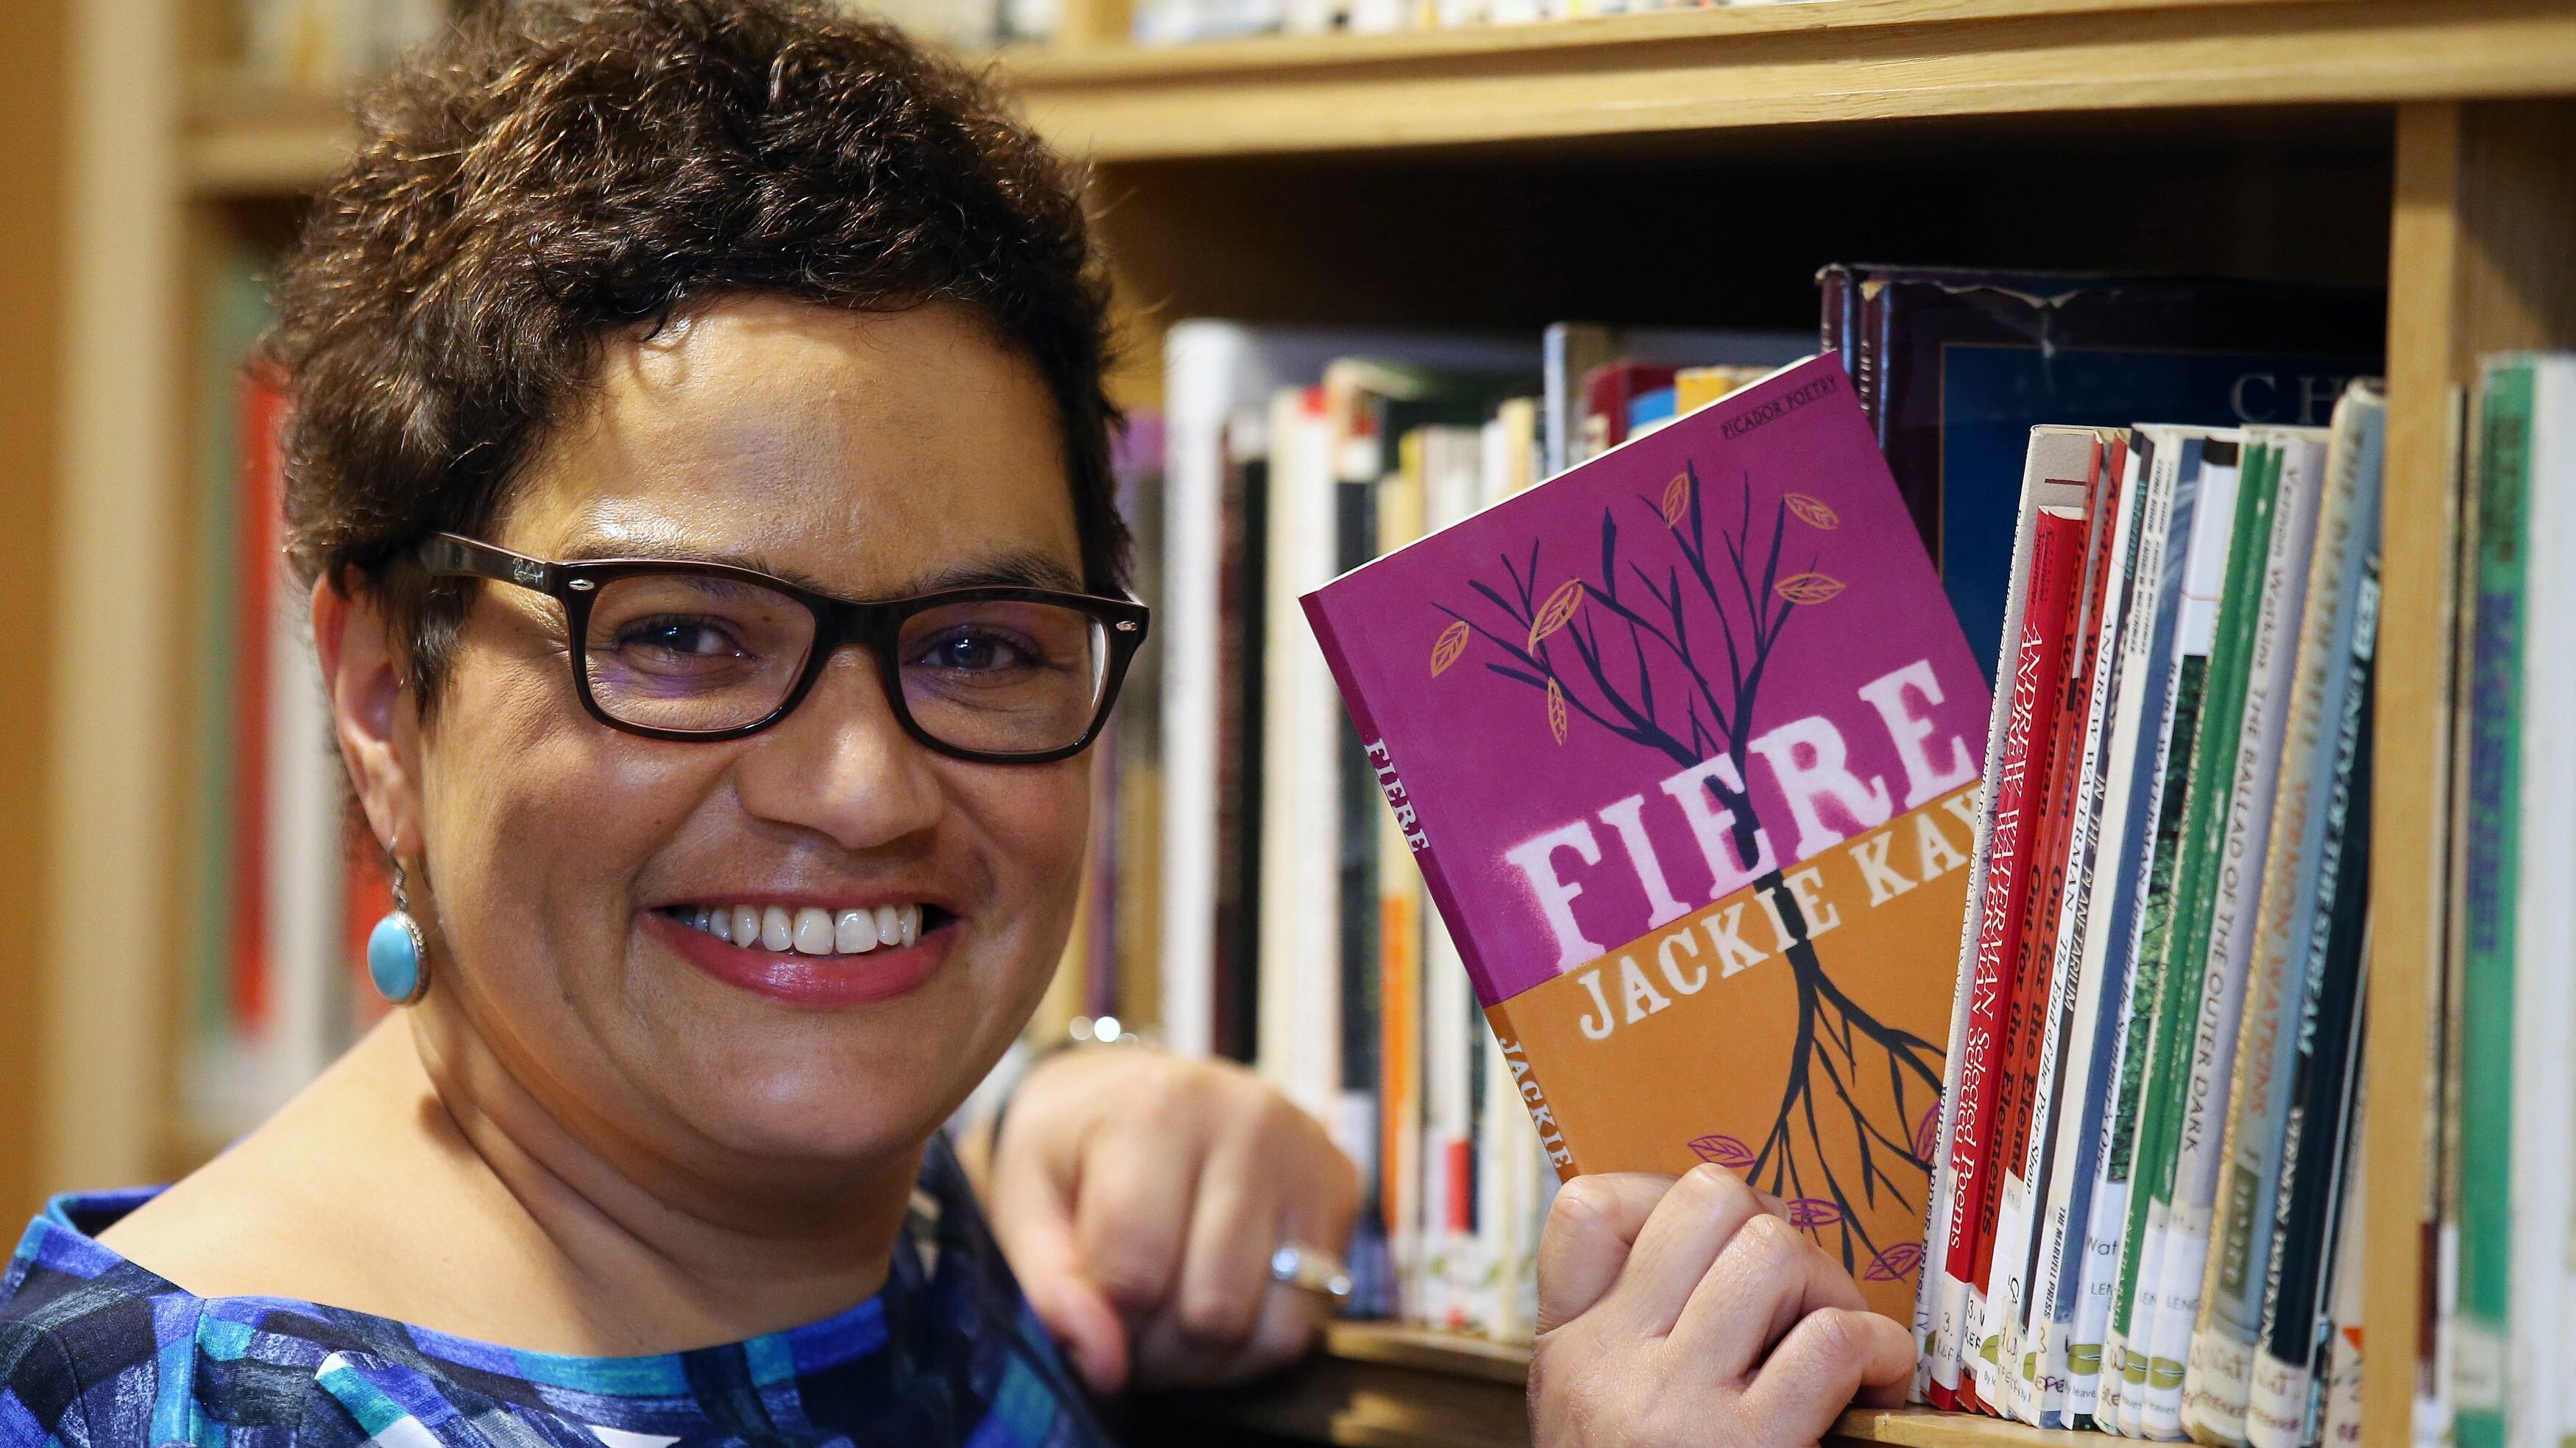 New Makar Jackie Kay will be an interviewer at the book festival